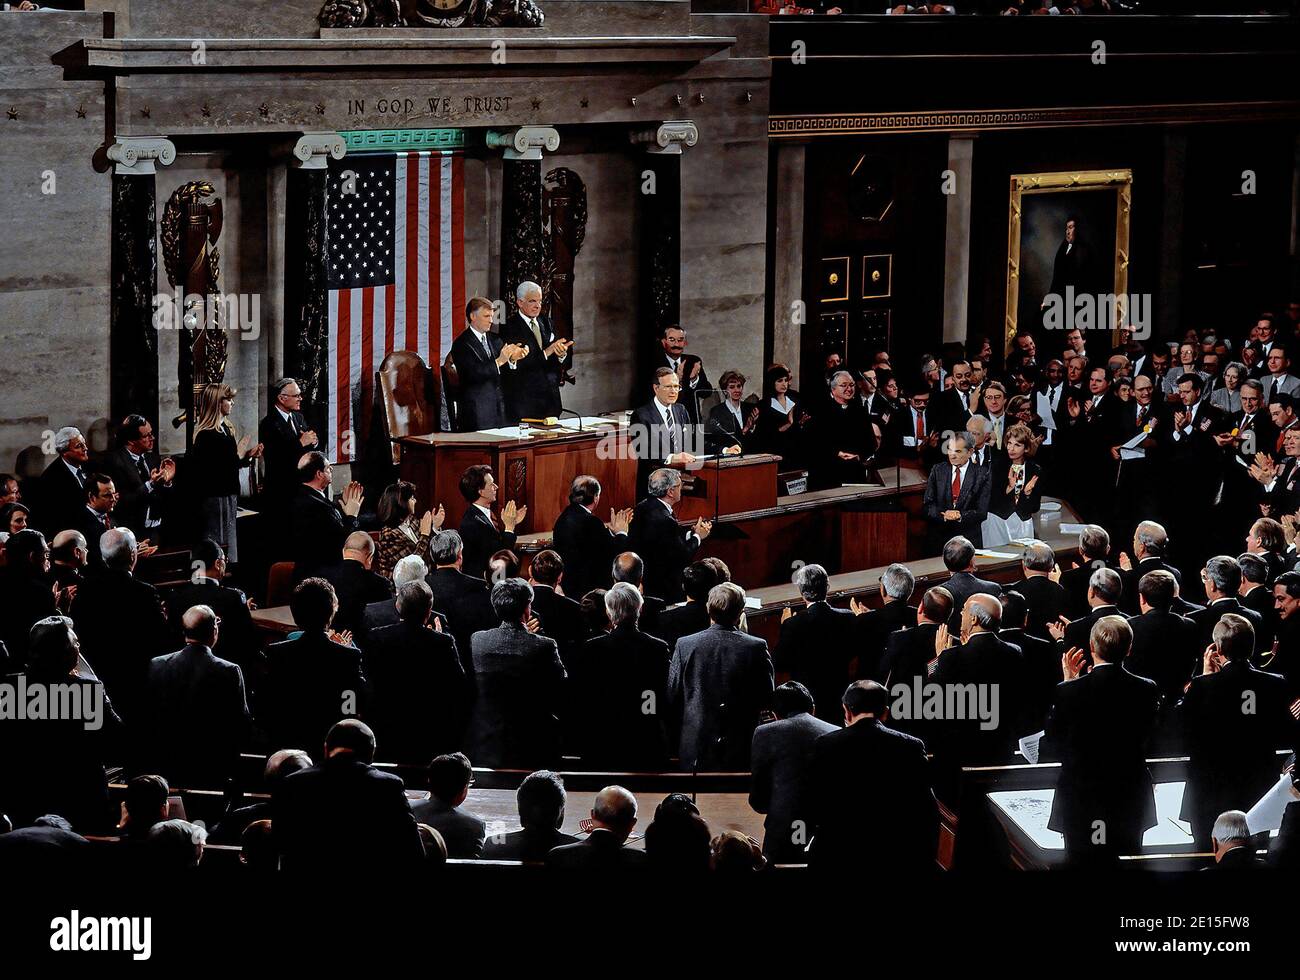 Washington, DC. USA, March 6, 1991 President George H.W. Bush delivers his Address Before a Joint Session of the Congress on the Cessation of the Persian Gulf Conflict, to a standing ovation lead by Vice President Daniel Quayle and Speaker of the House Tom Foley Stock Photo